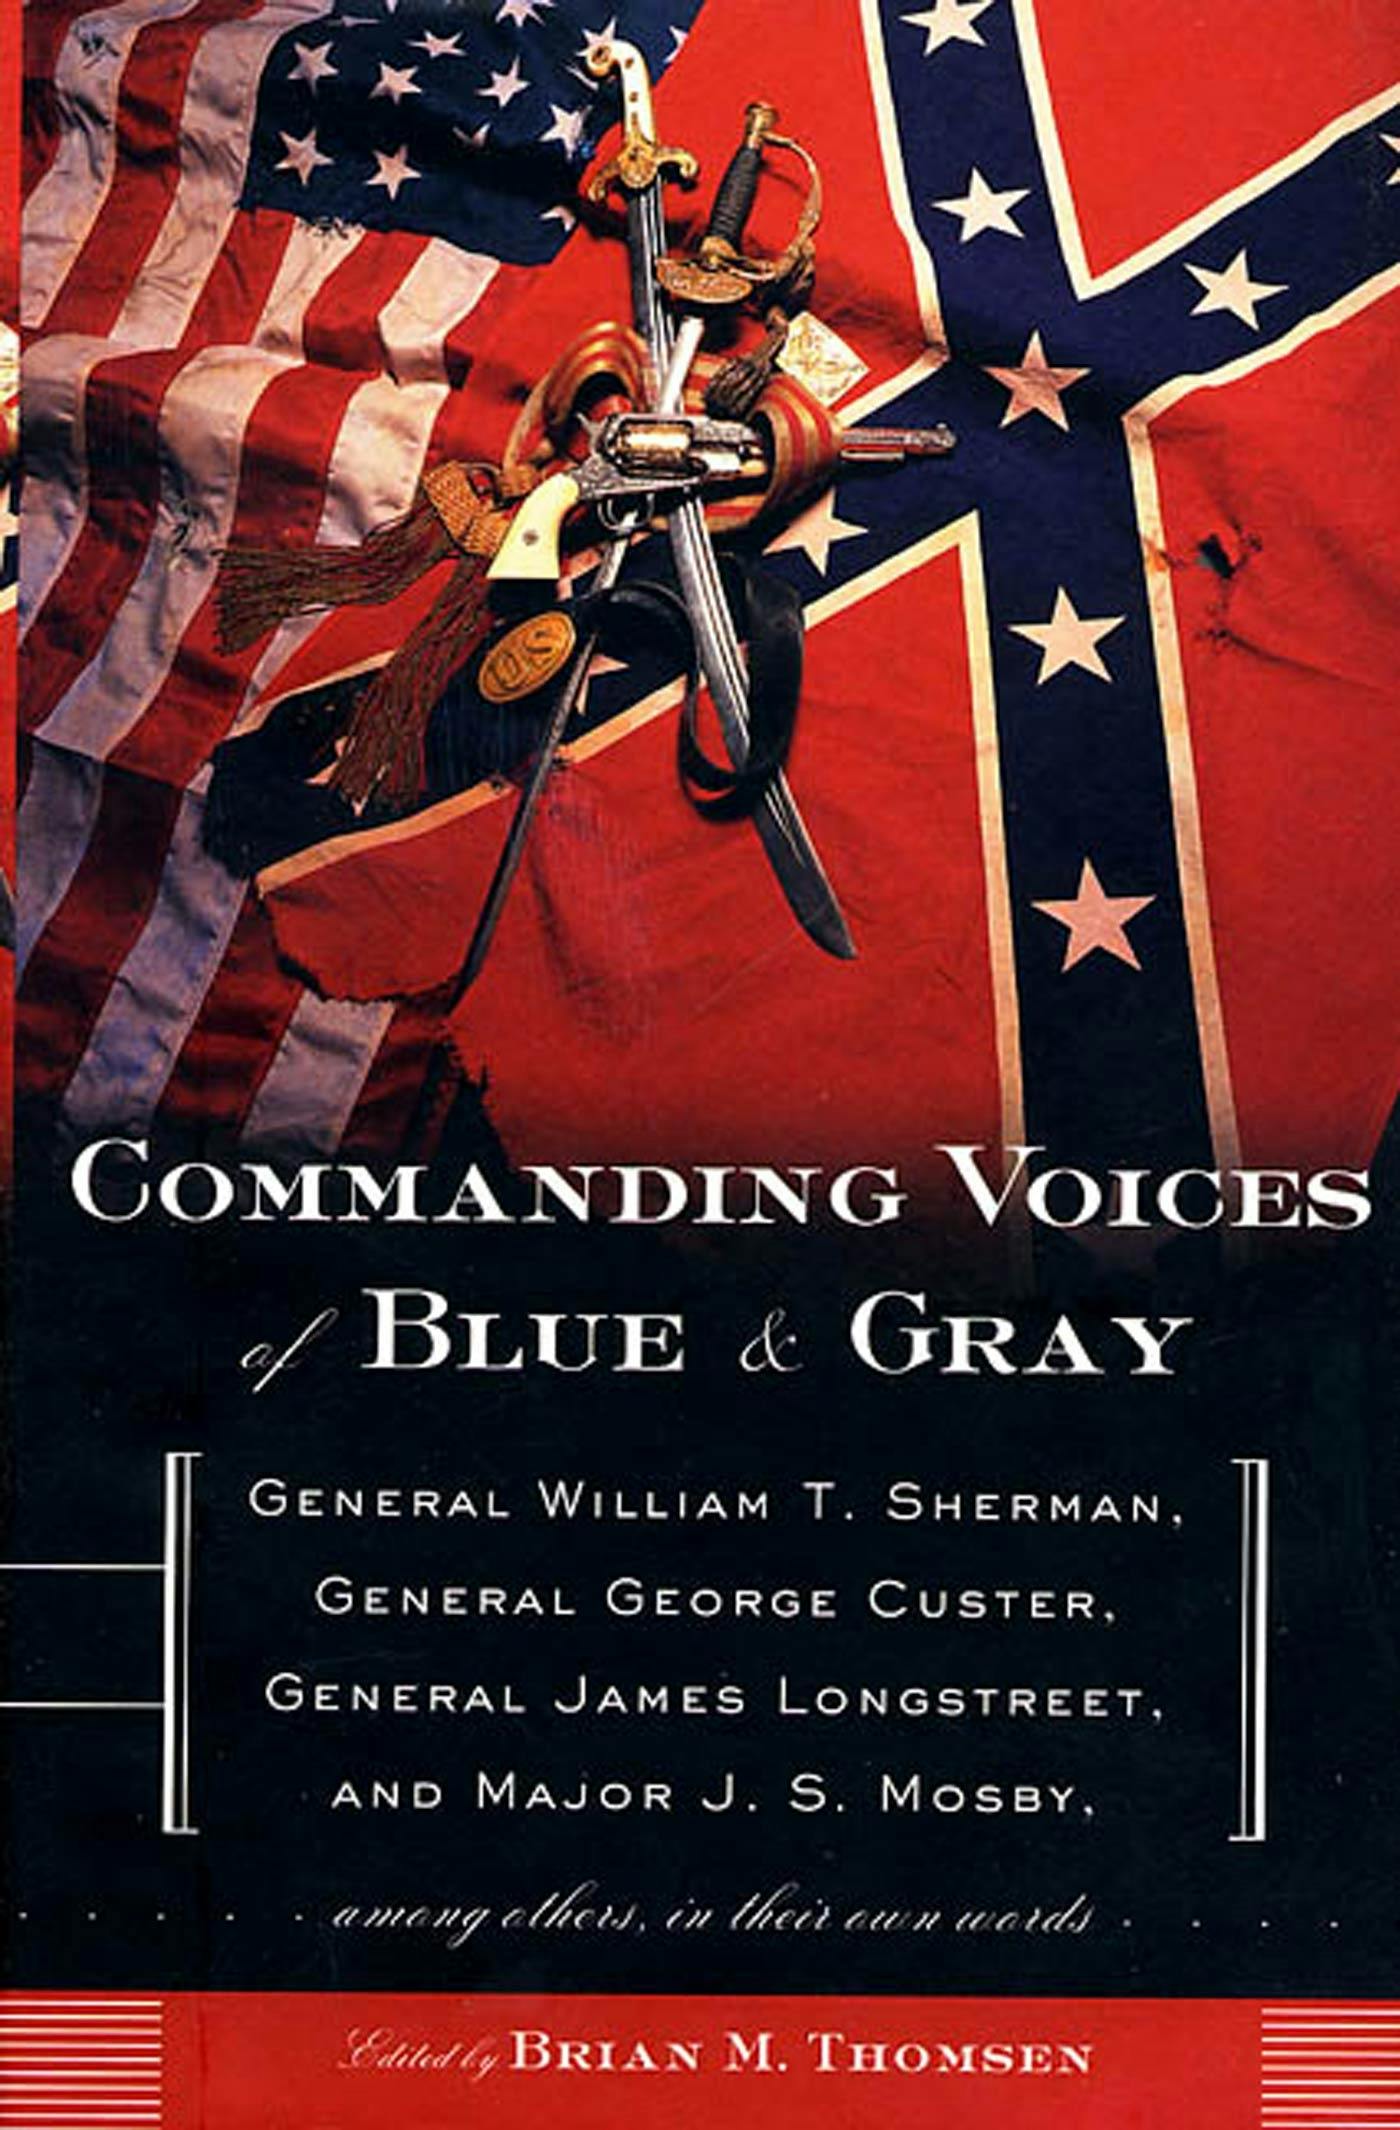 Cover for the book titled as: Commanding Voices of Blue & Gray